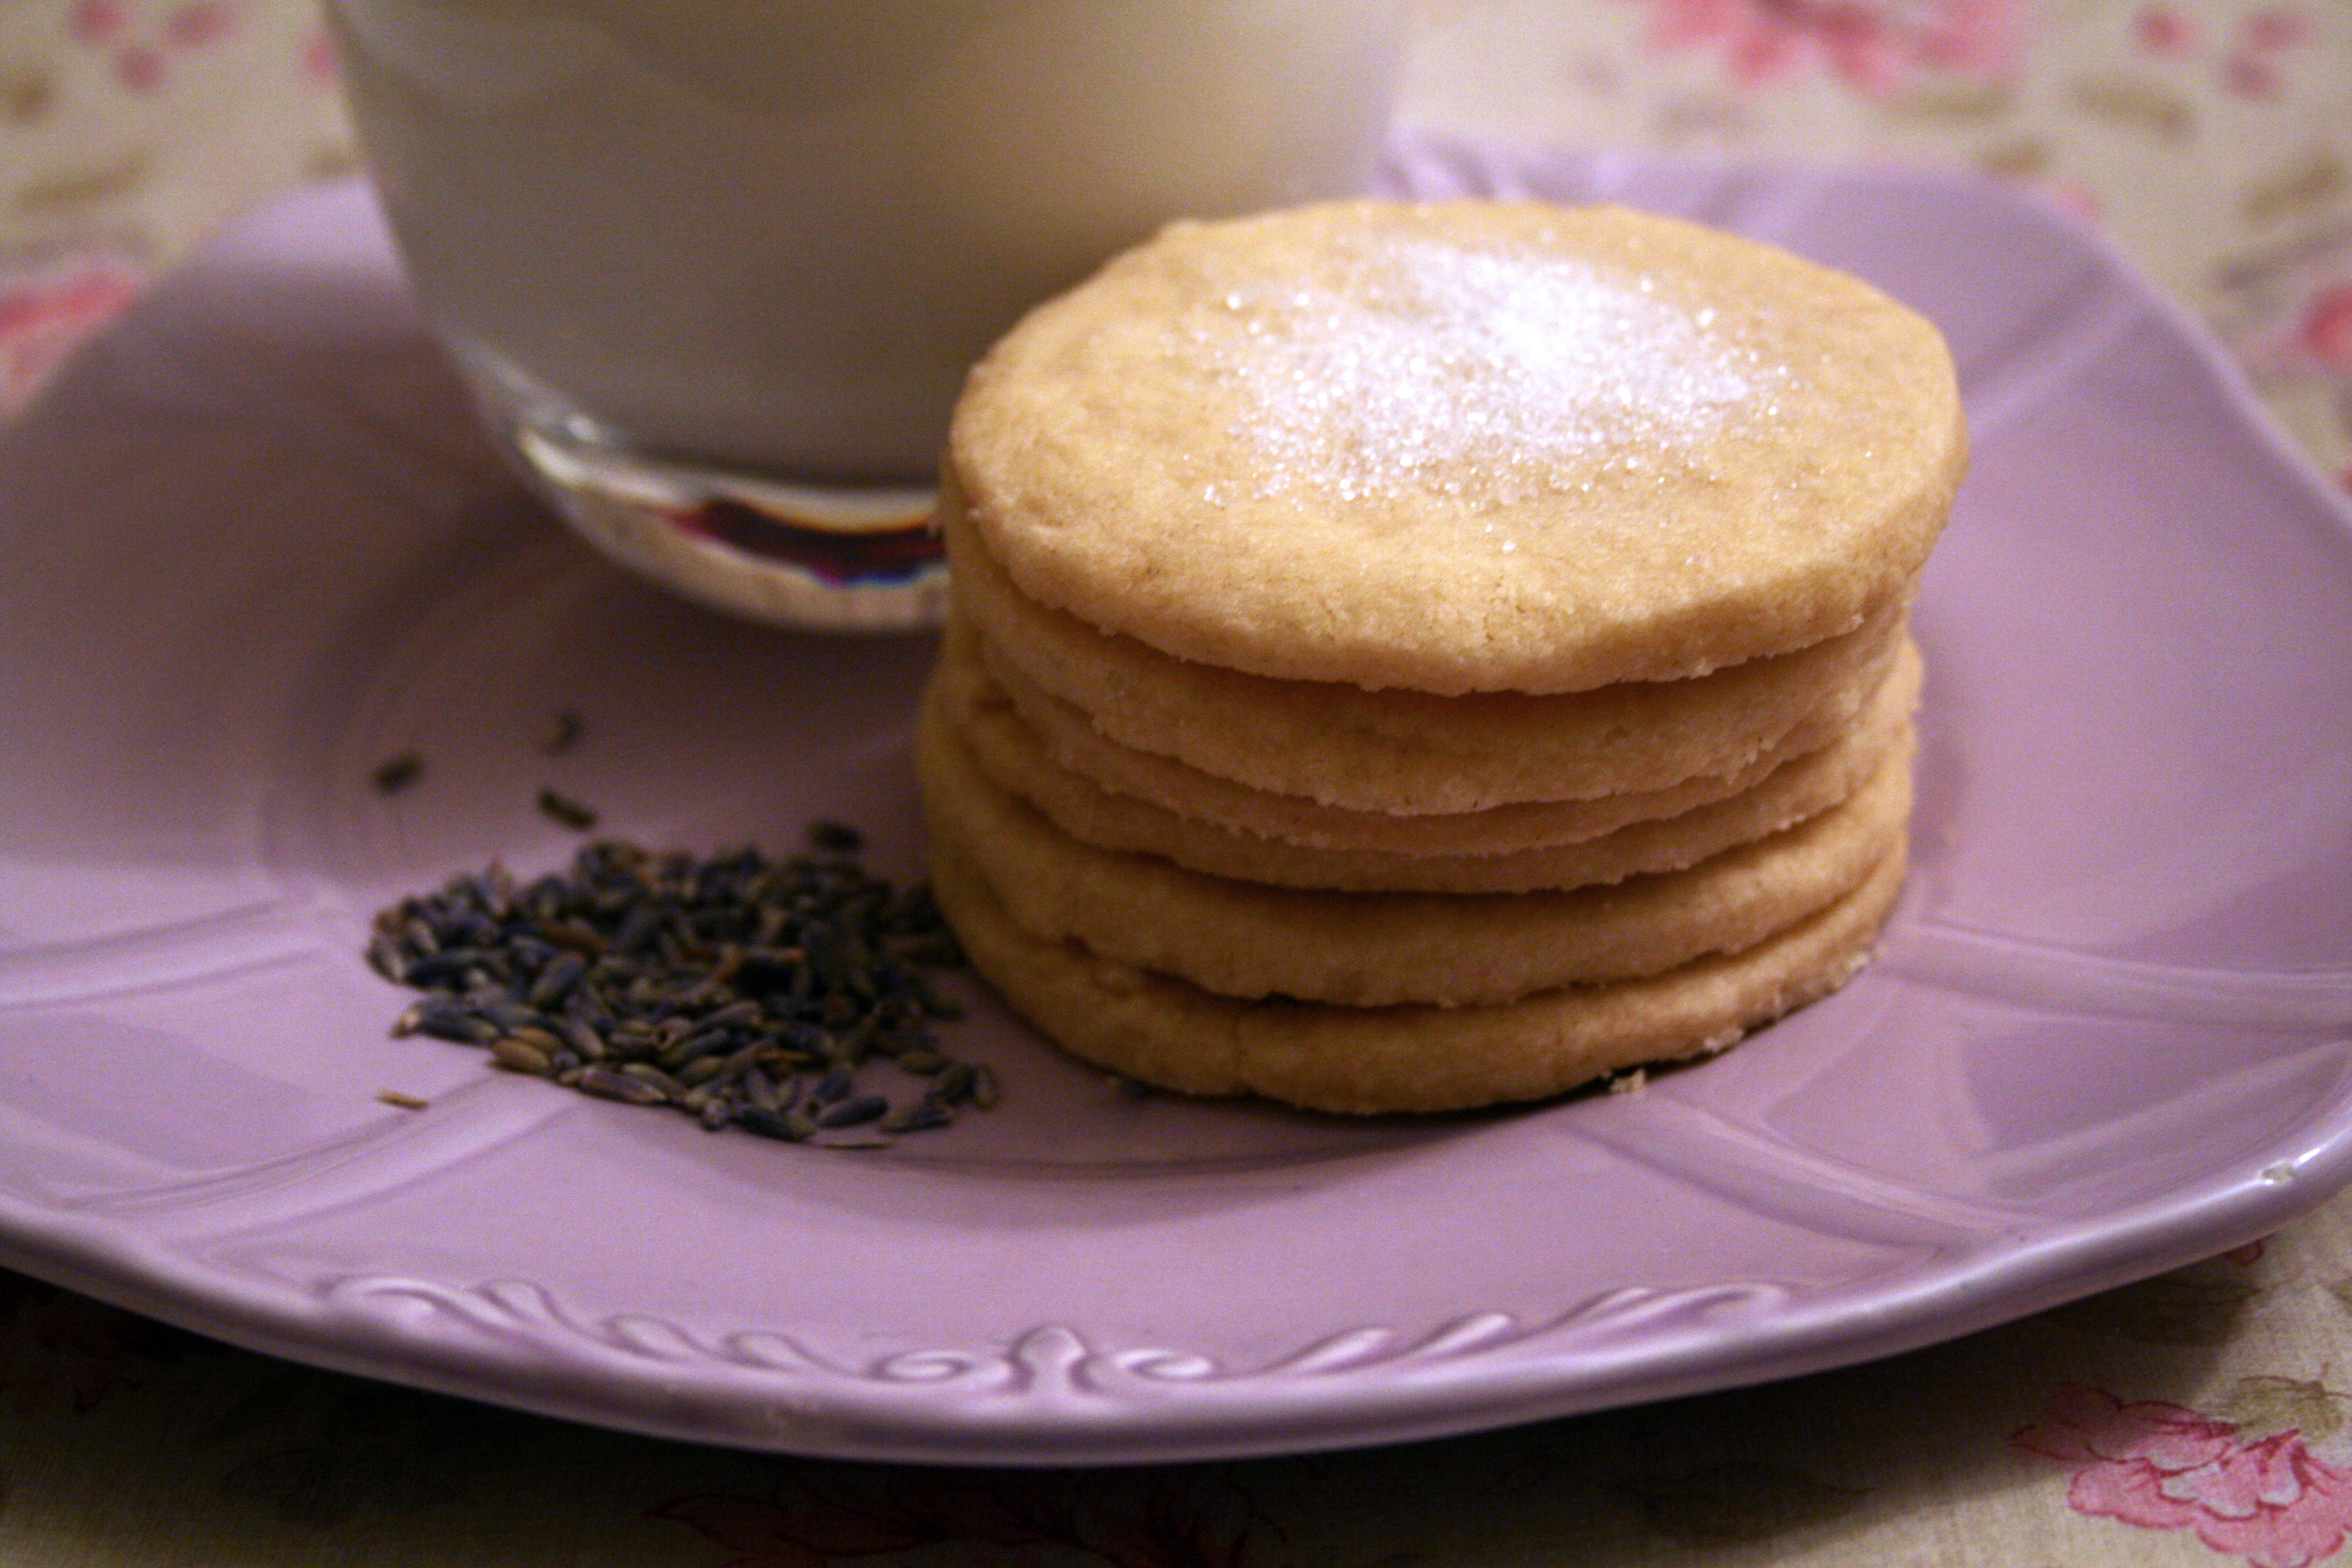 Lavender Milk and Vanilla Biscuits on Plate